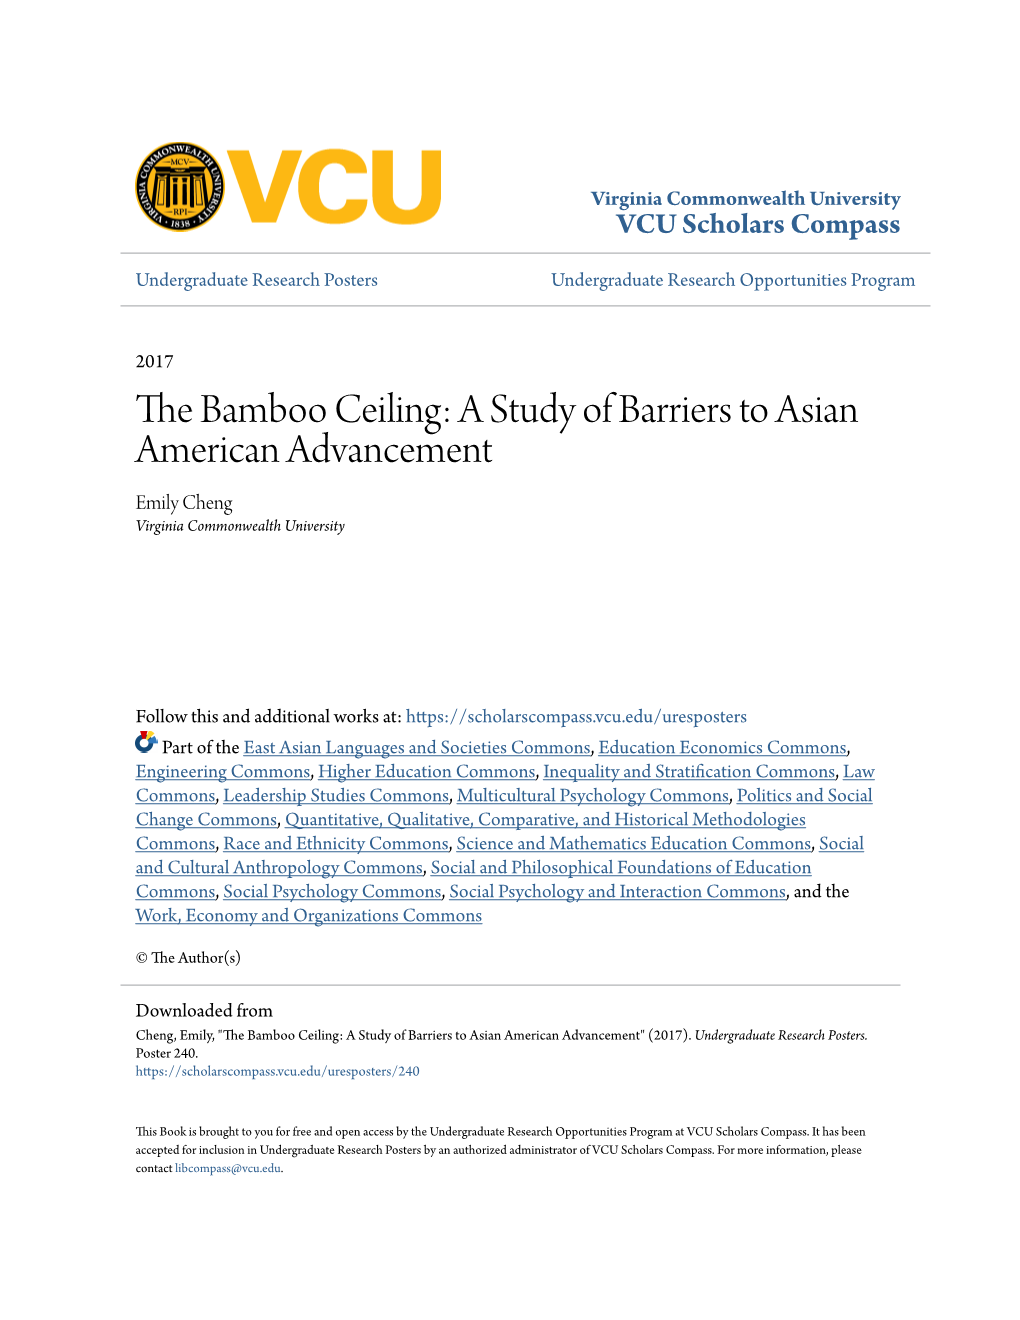 The Bamboo Ceiling: a Study of Barriers to Asian American Advancement Emily Cheng Virginia Commonwealth University